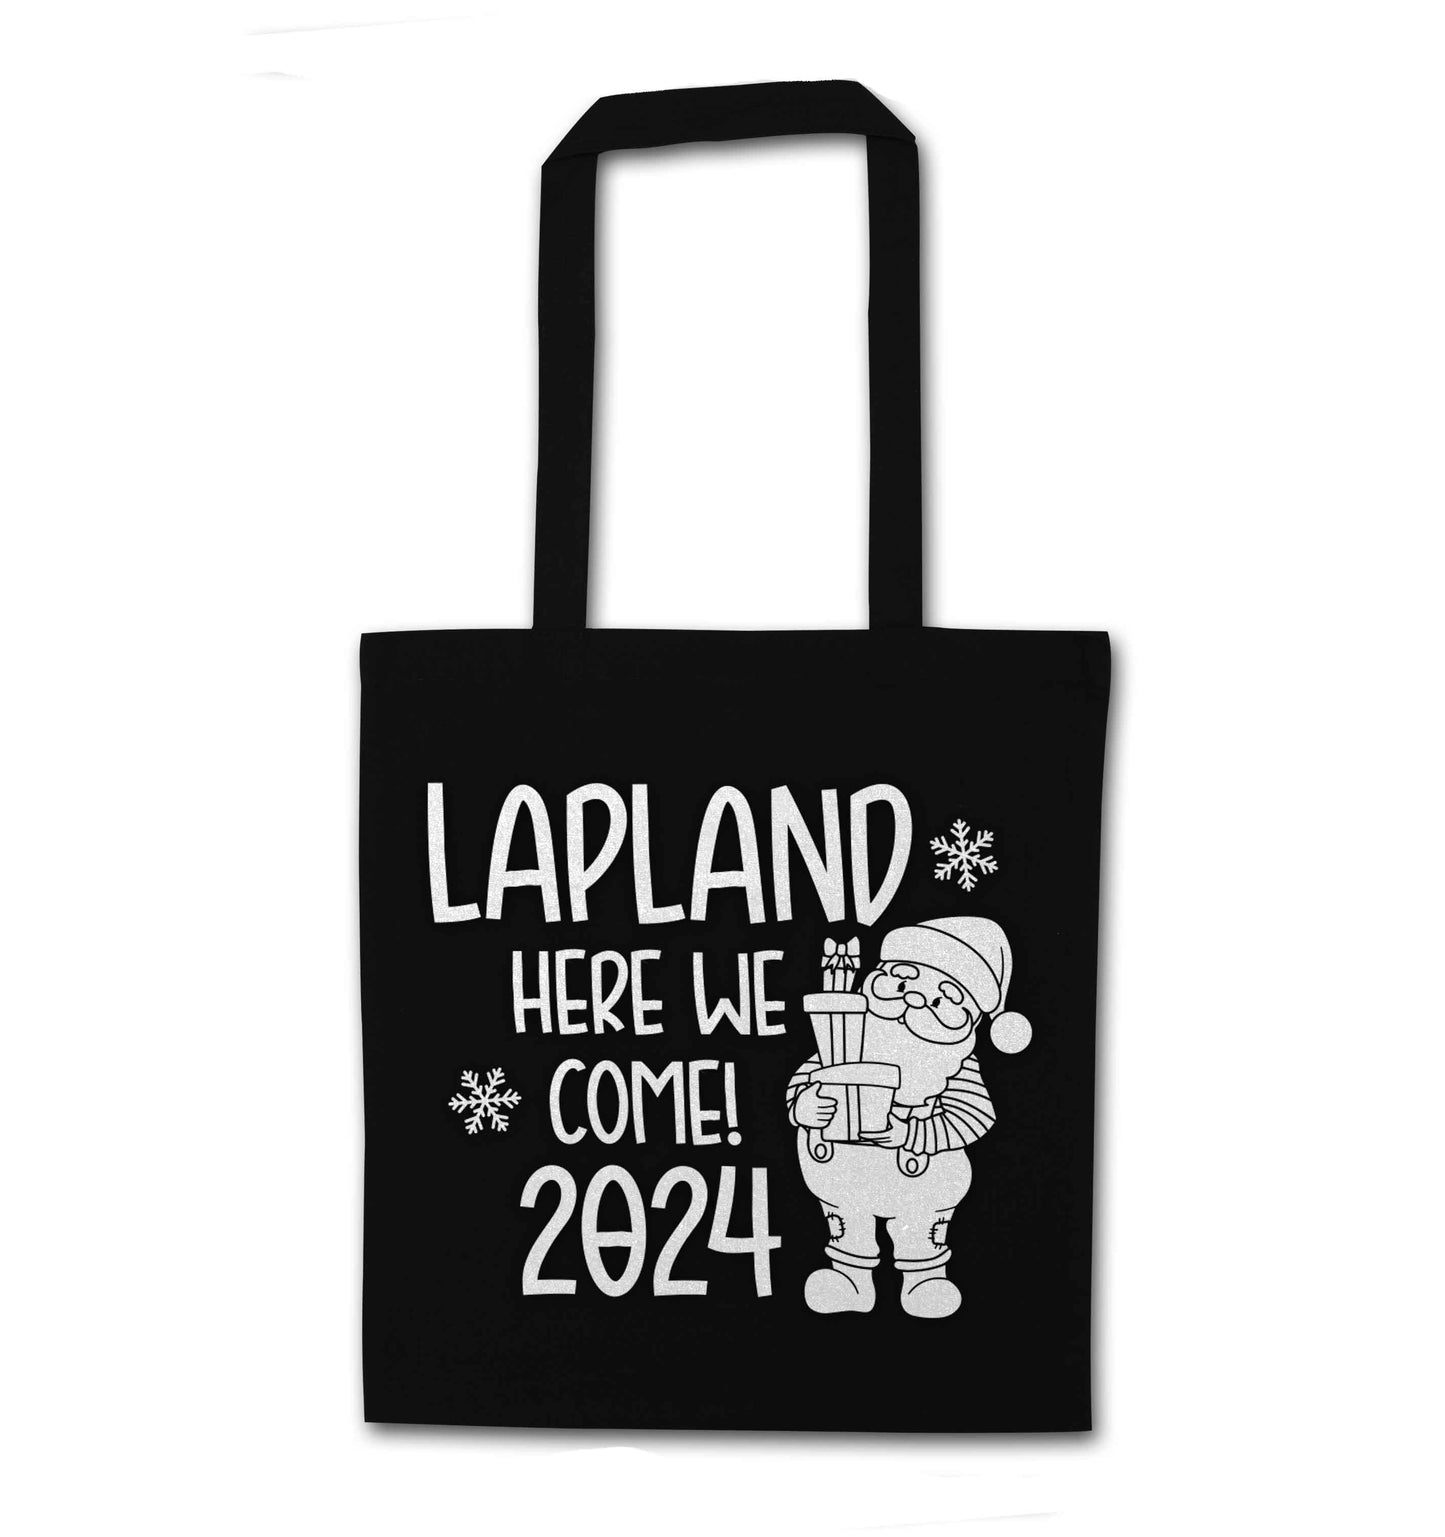 Lapland here we come black tote bag